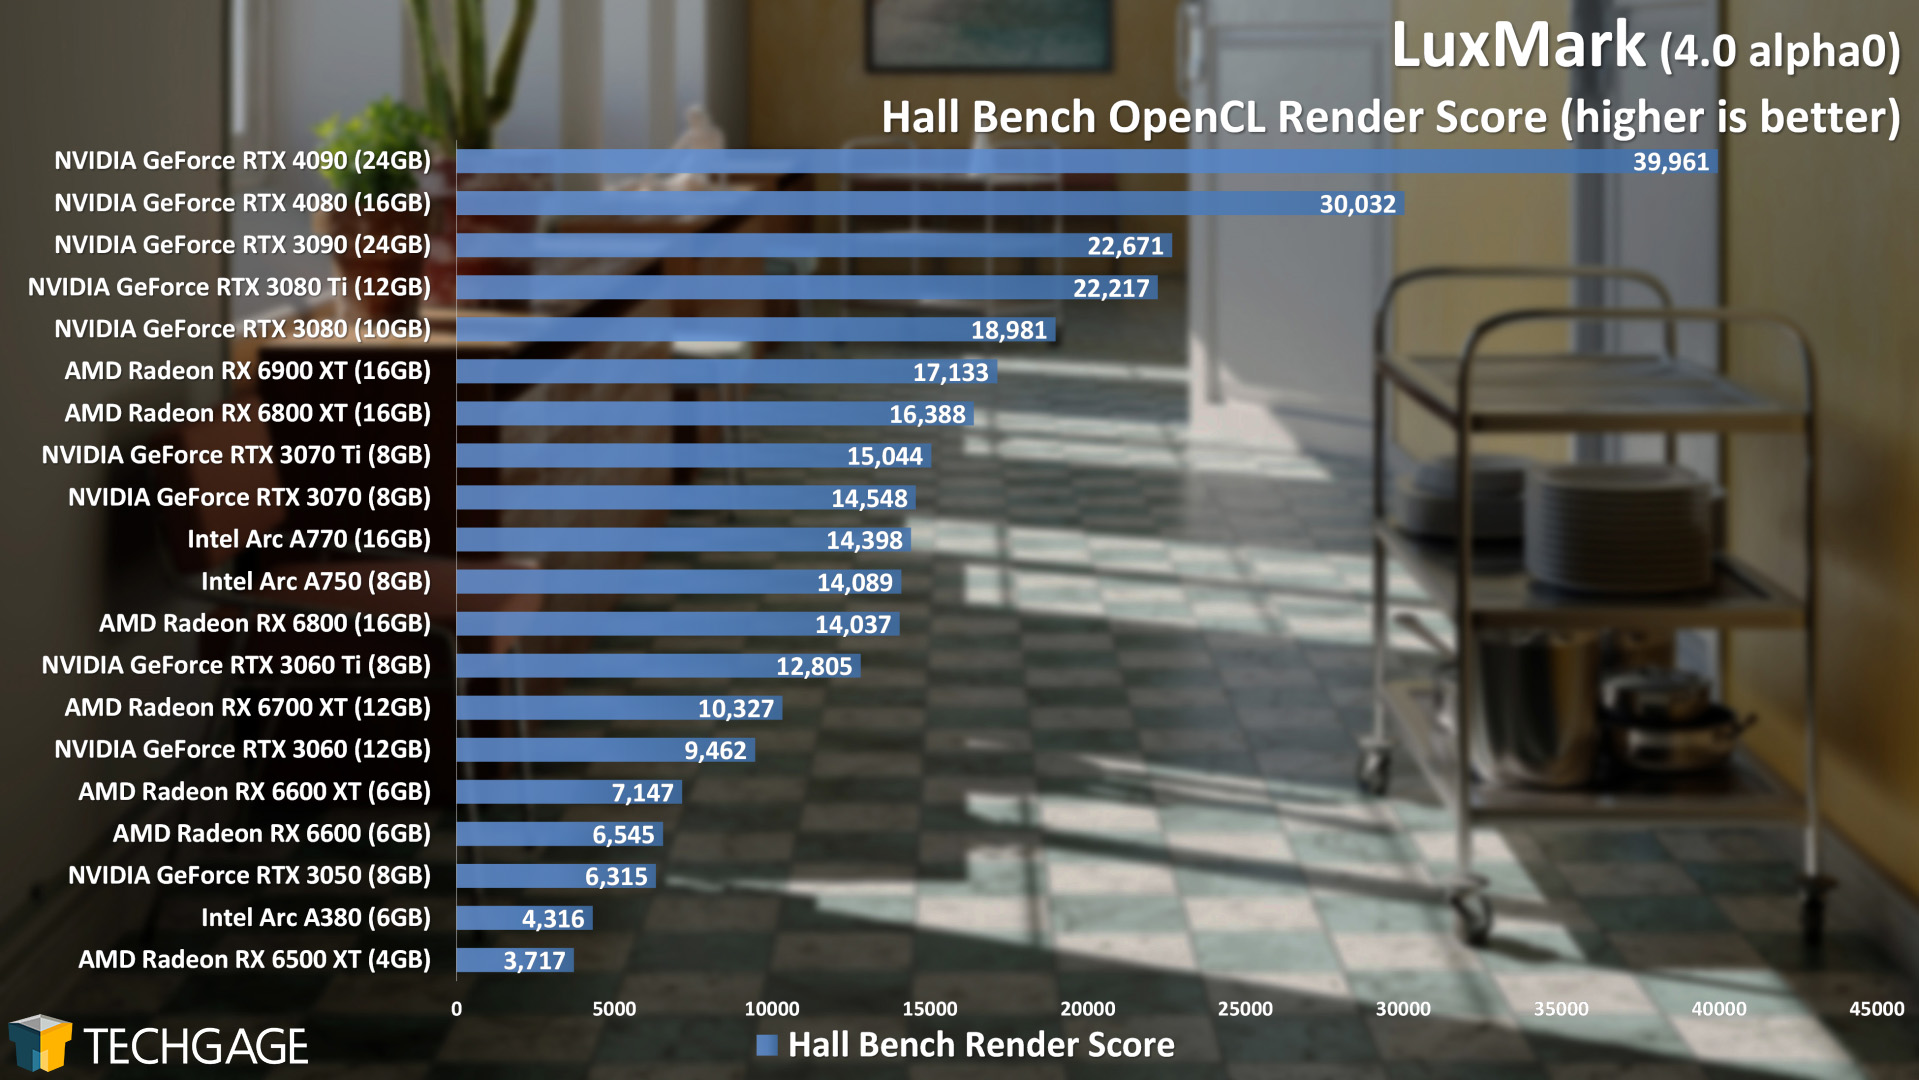 LuxMark Performance - Hall Bench OpenCL Score (NVIDIA GeForce RTX 4080)